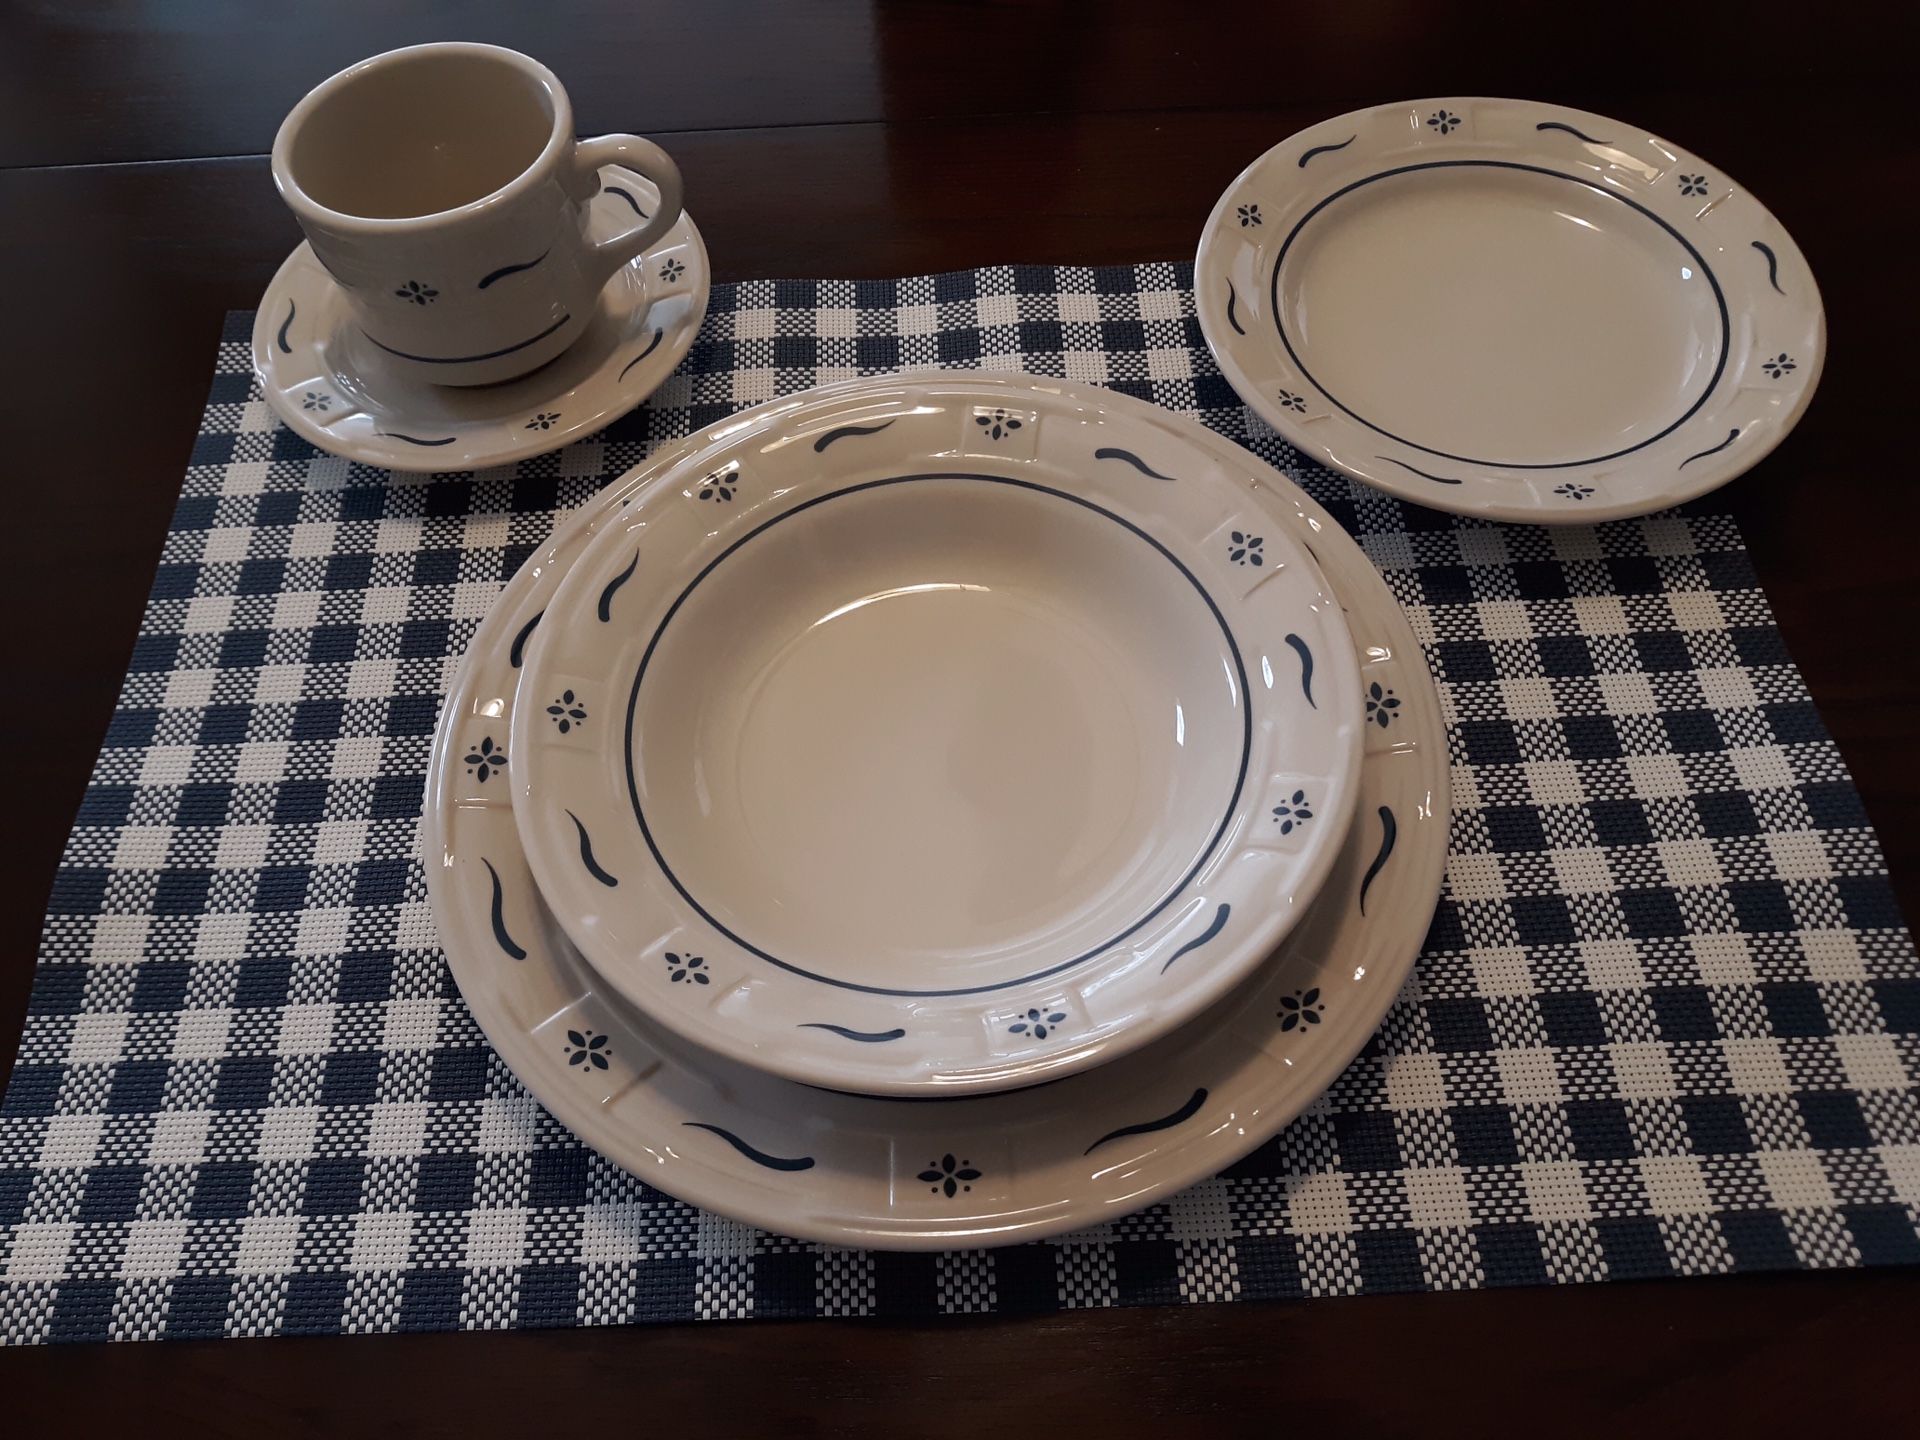 Longaberger pottery dishes. 8 place complete place settings plus much more